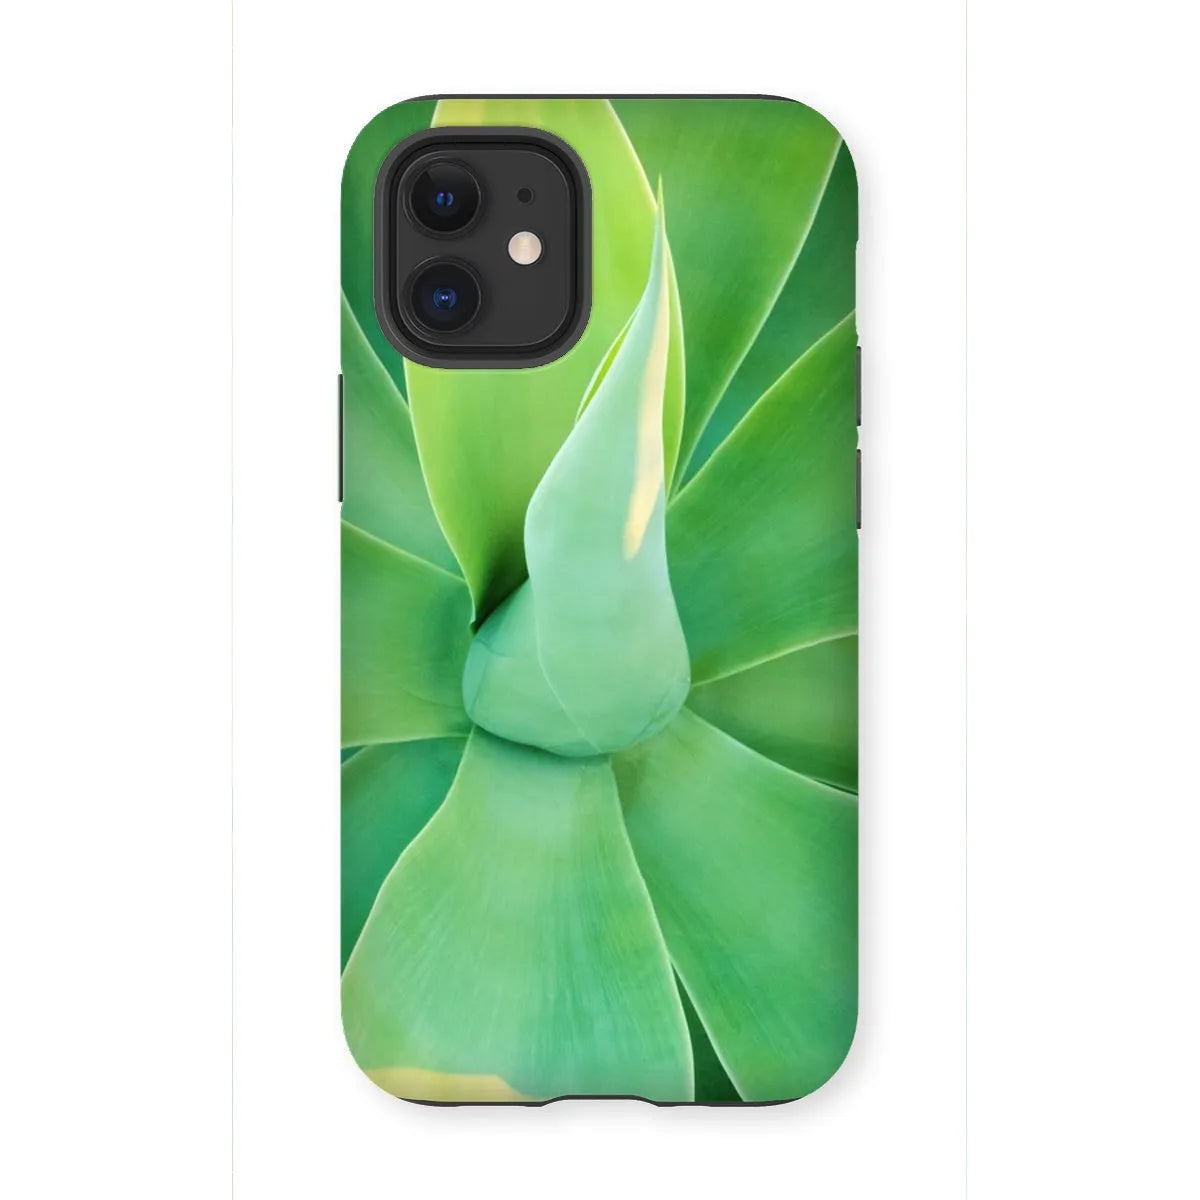 In Bloom Too Tough Phone Case - Iphone 12 Mini / Matte - Mobile Phone Cases - Aesthetic Art